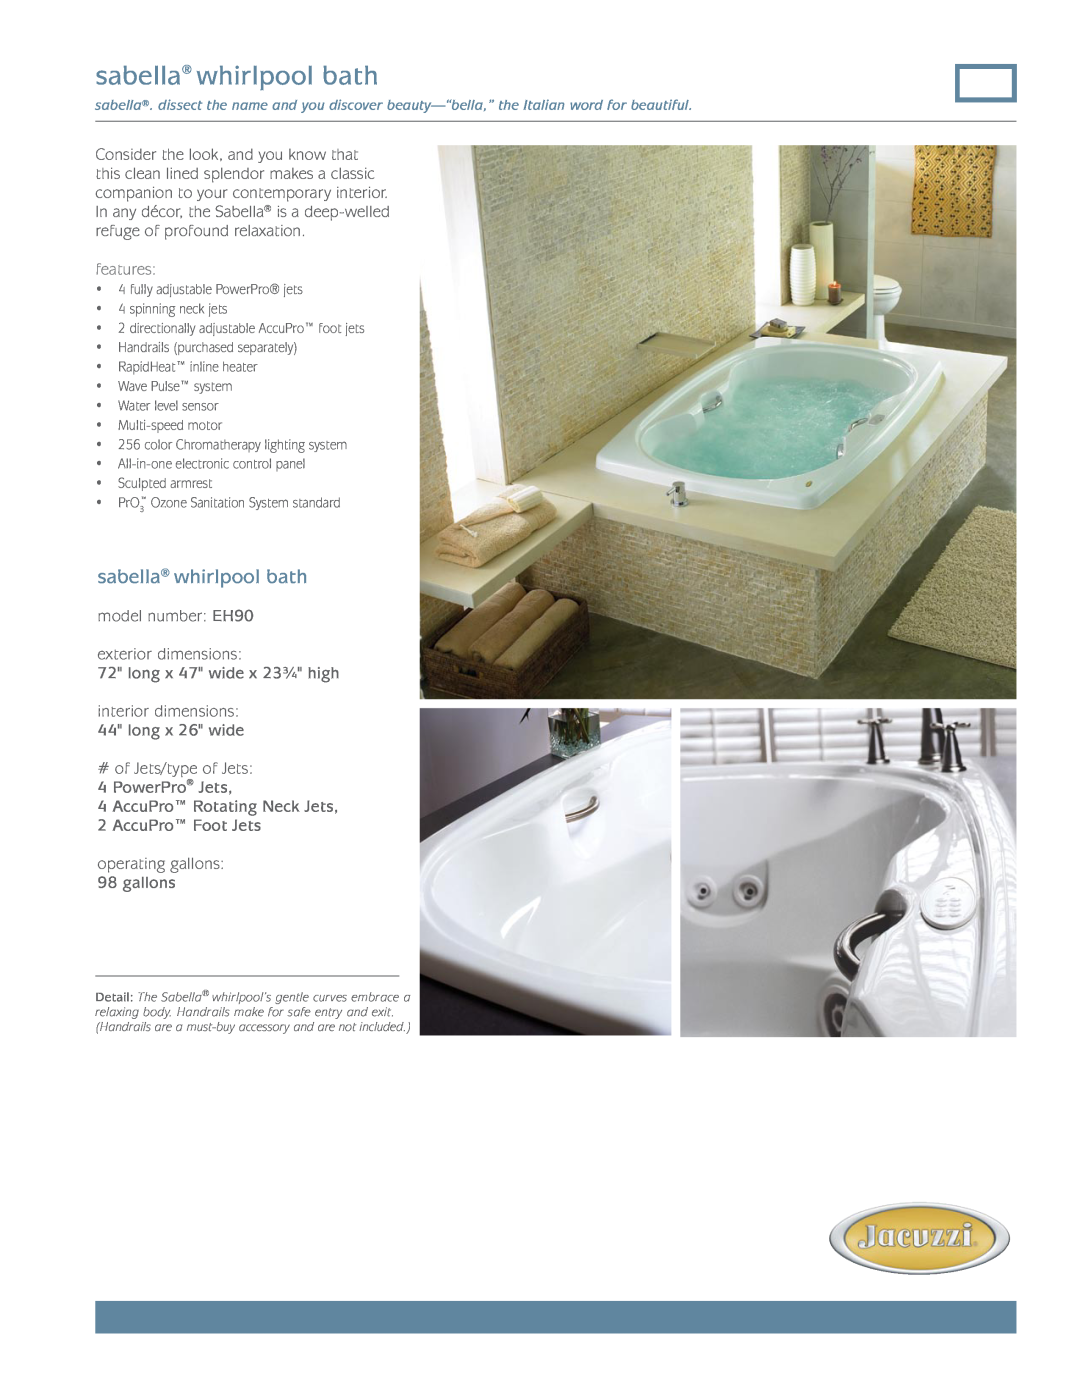 Jacuzzi dimensions sabella whirlpool bath, features, model number: EH90 exterior dimensions, long x 47 wide x 23¾ high 